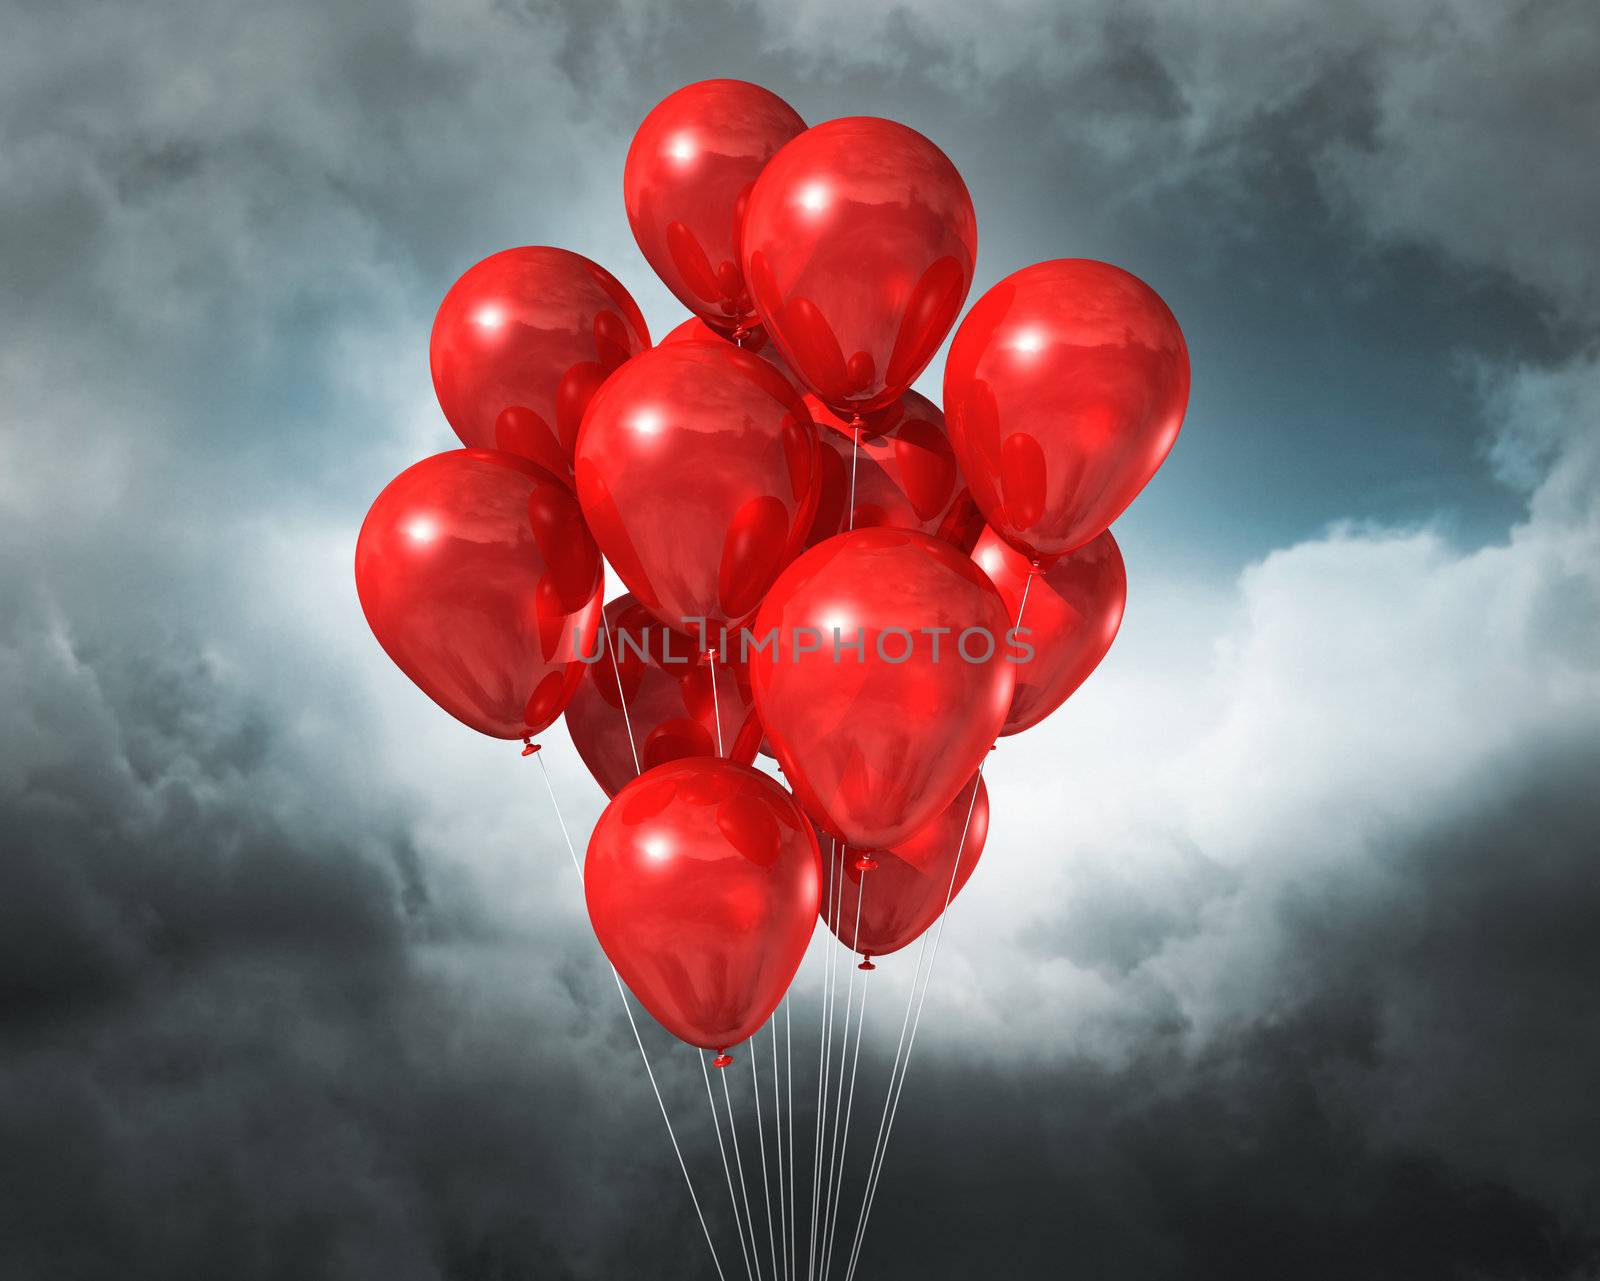 red balloons on a dark cloudy dramatic sky